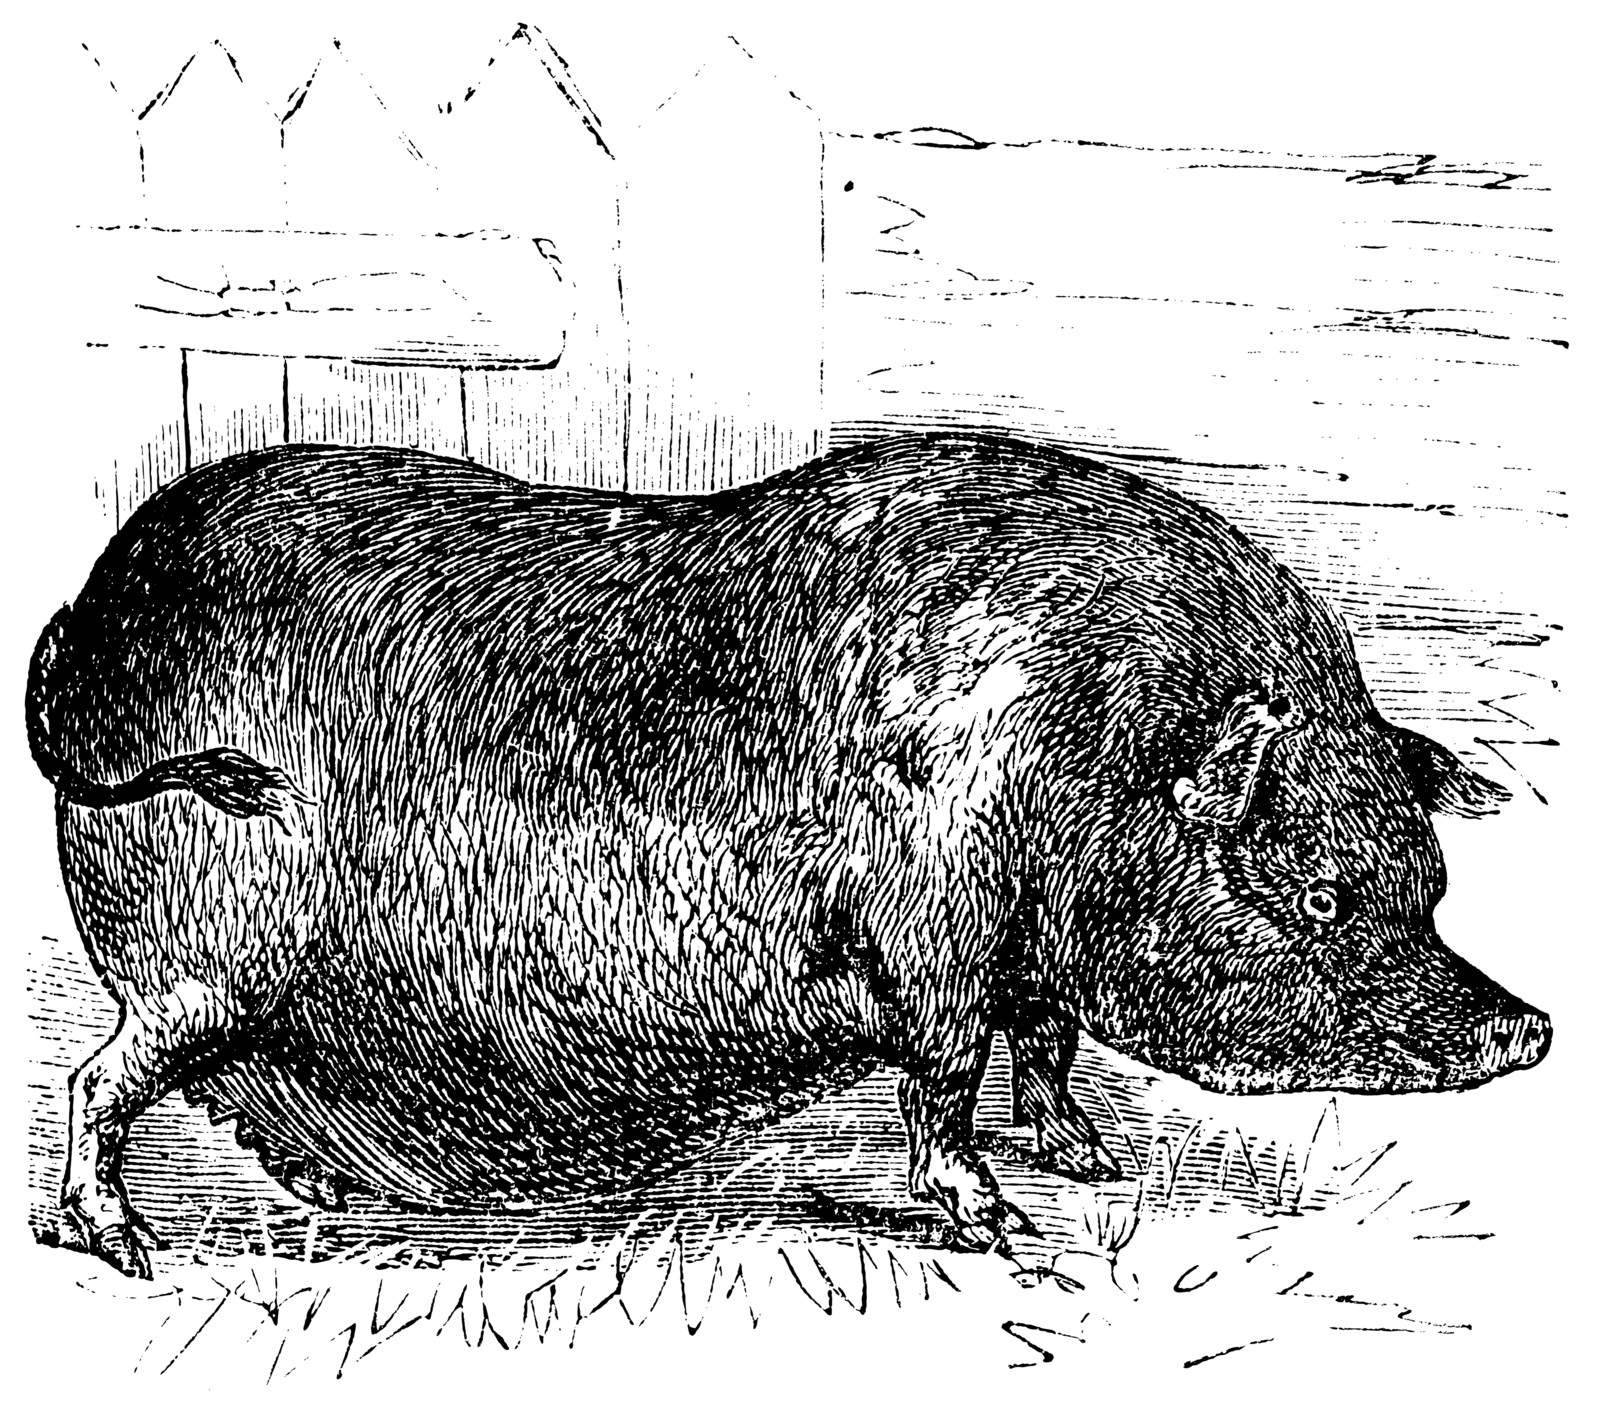 Heude's Pig or Indochinese Warty Pig or Vietnam Warty Pig or Sus by Morphart